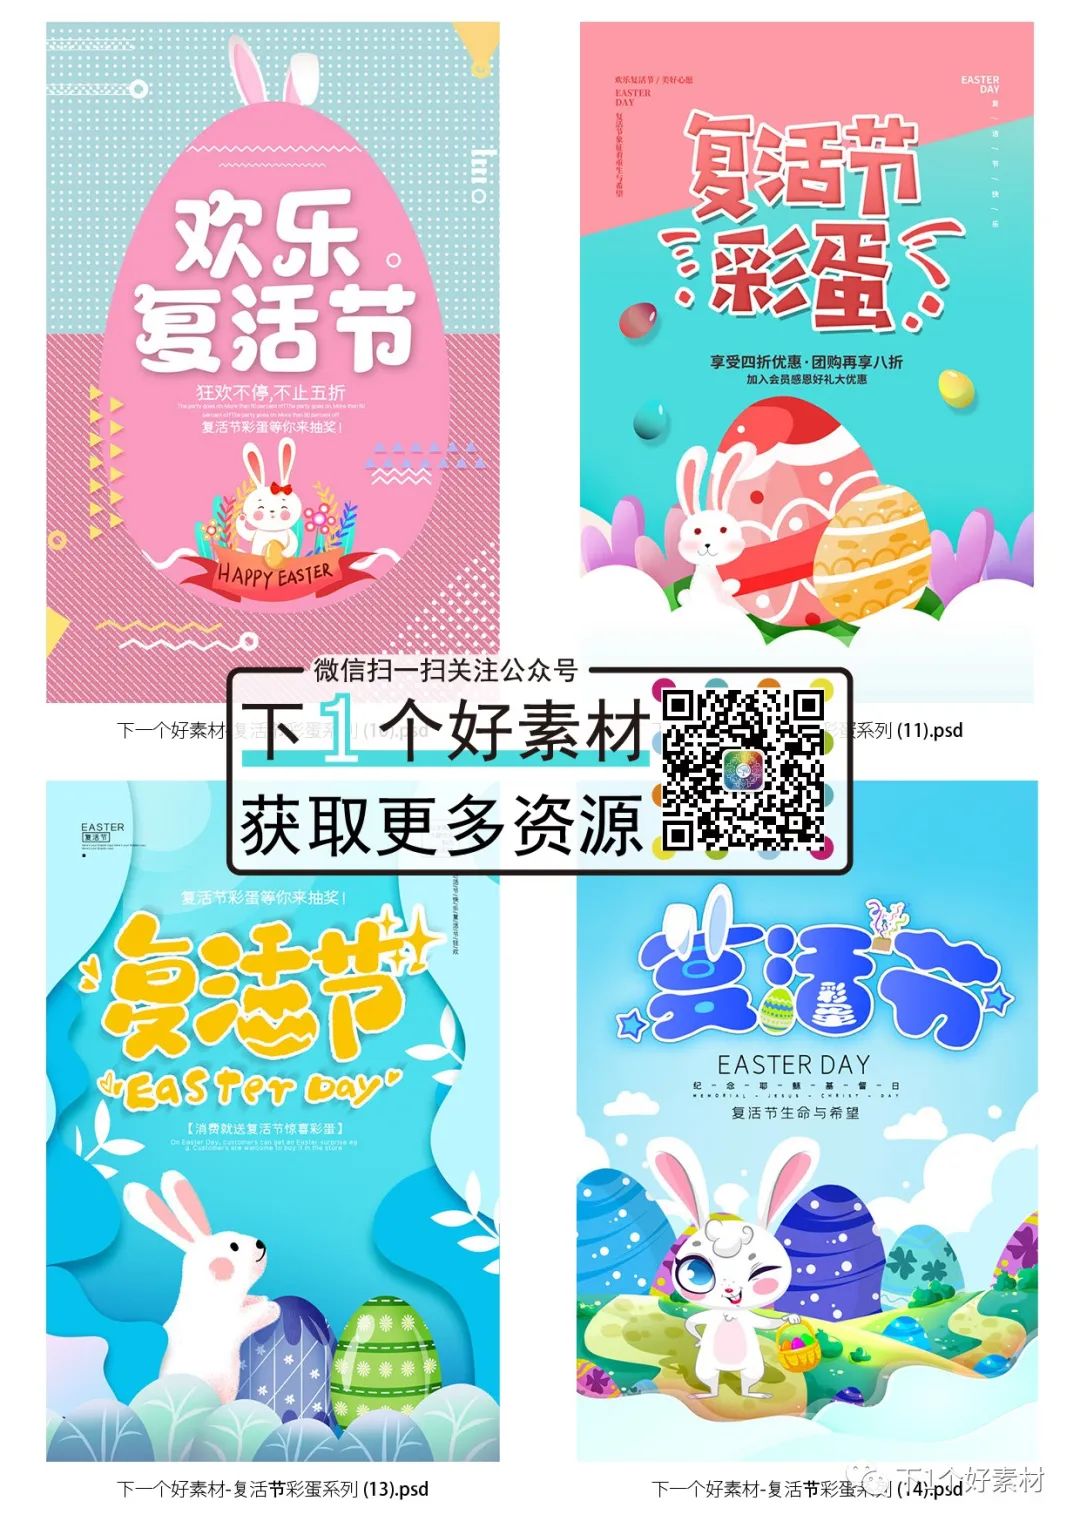 [EASTER DAY]-18款PSD复活节彩蛋系列(图3)